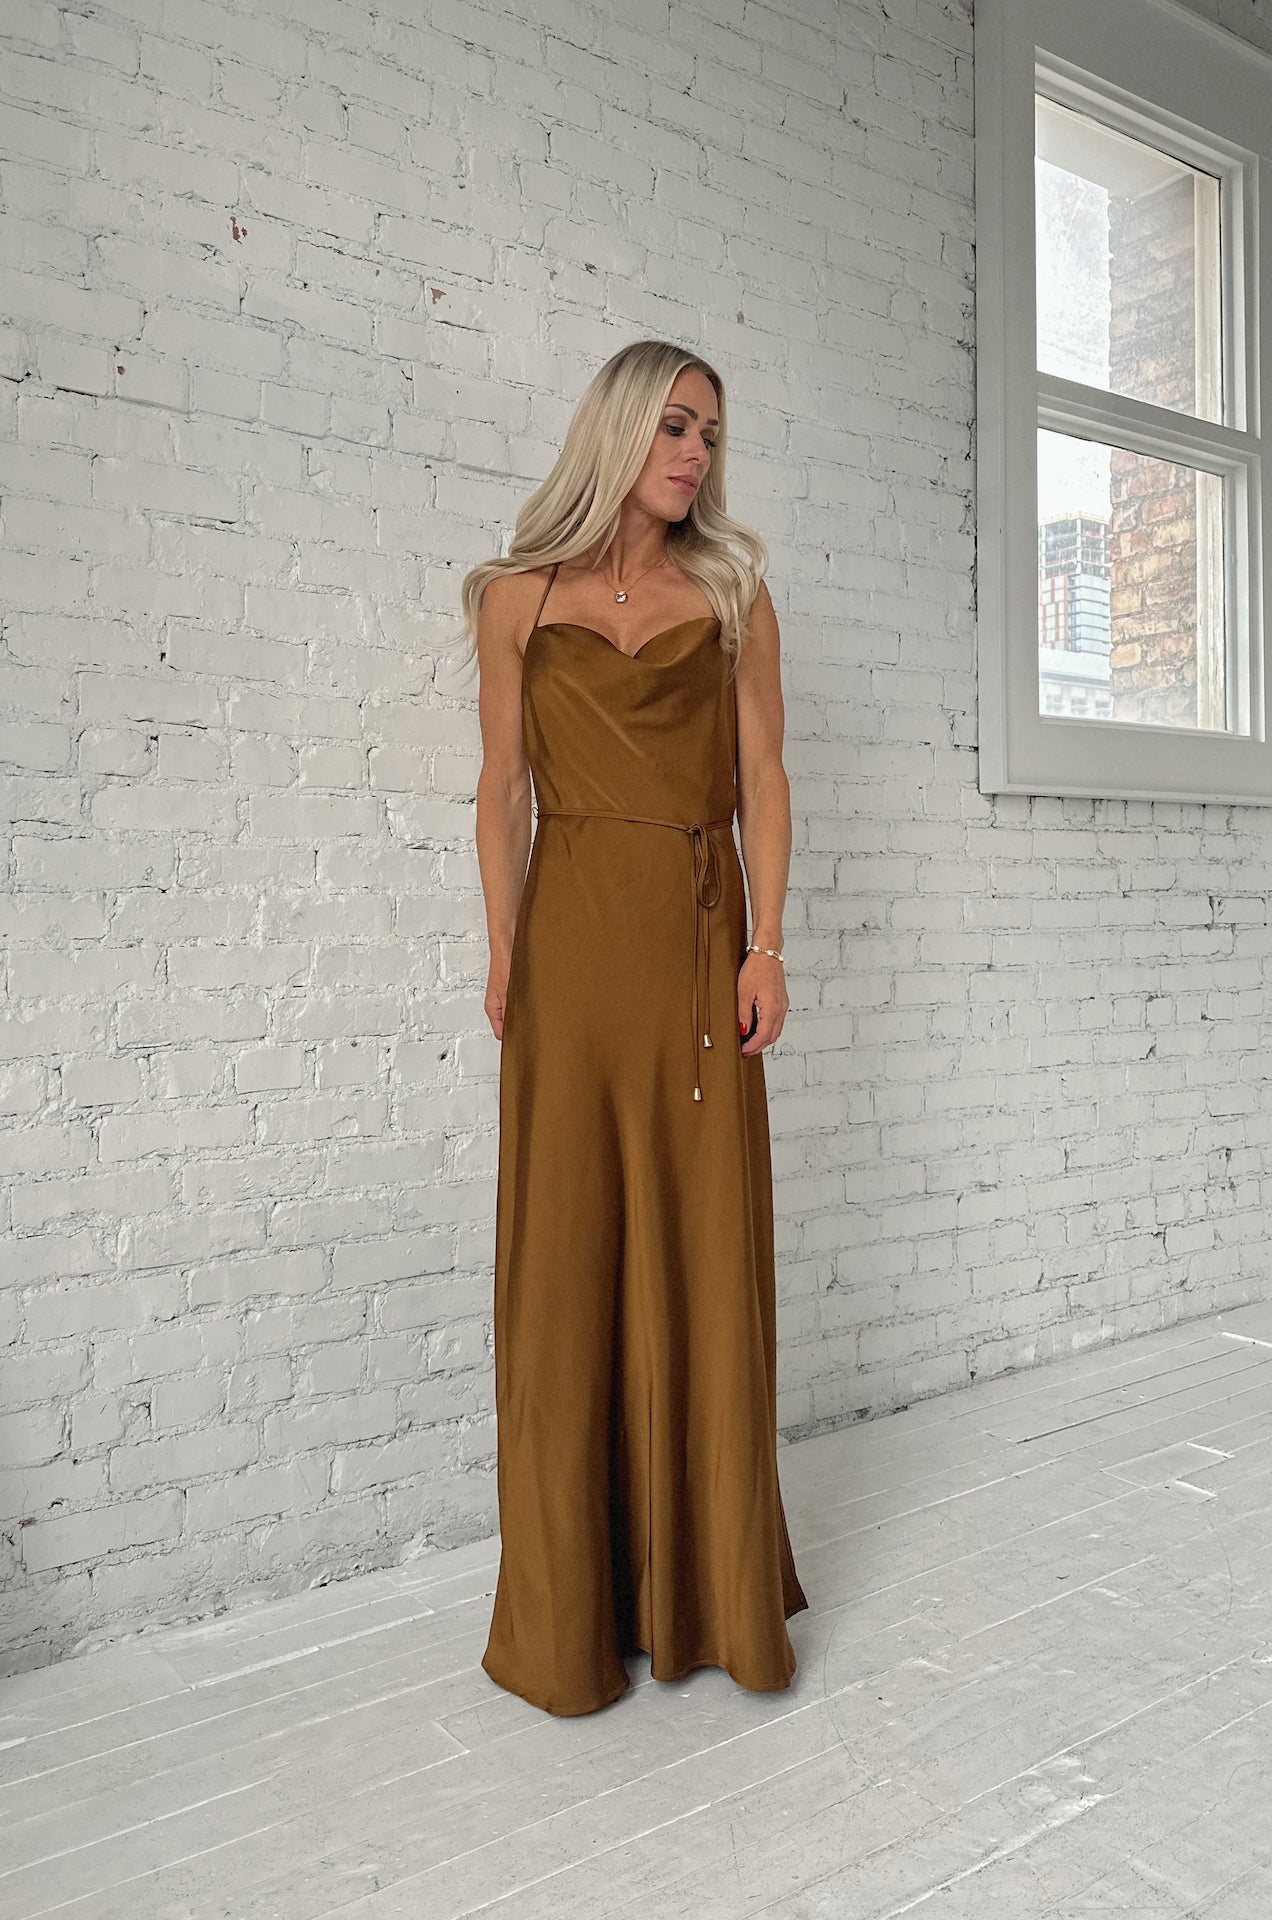 bronze brown satin maxi dress with a cowl neckline and criss cross back